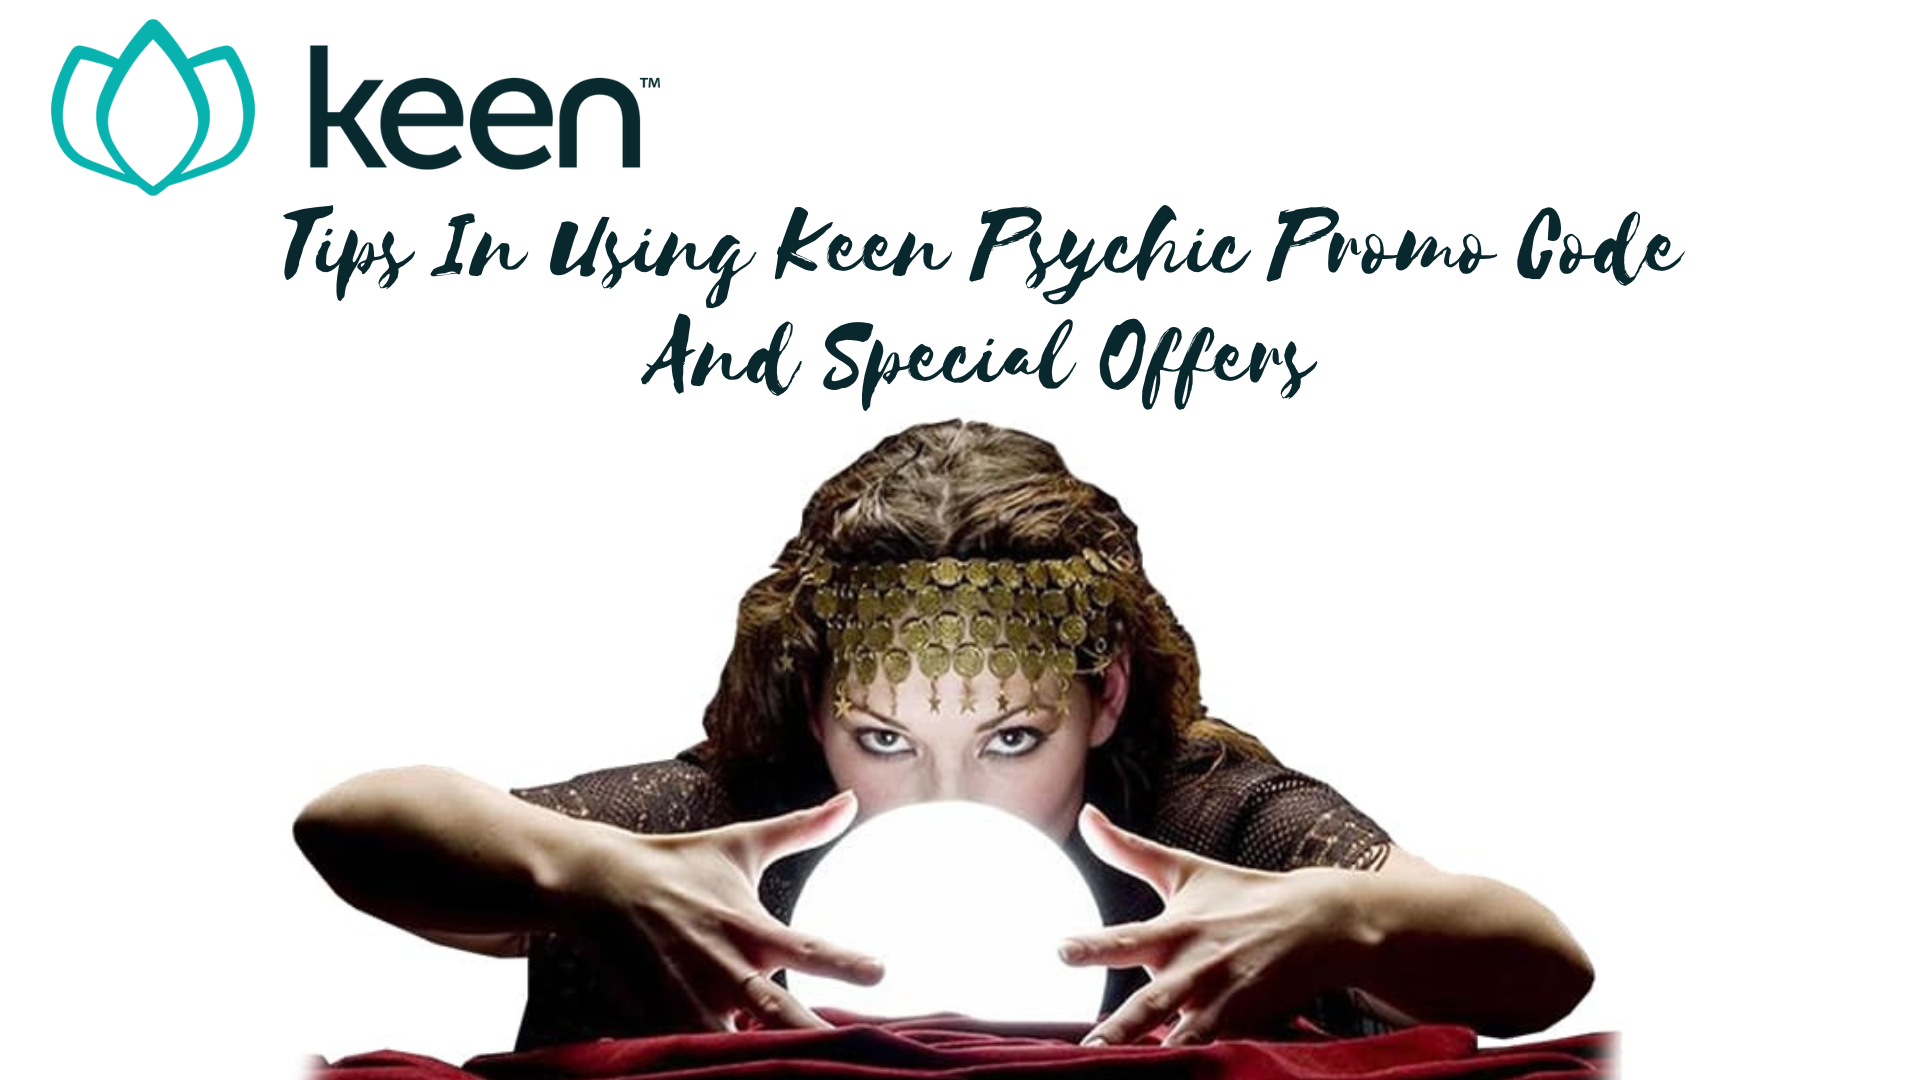 A psychic holding acrustal ball with keen psychic logo on top and words Tips In Using Keen Psychic Promo Code And Special Offers